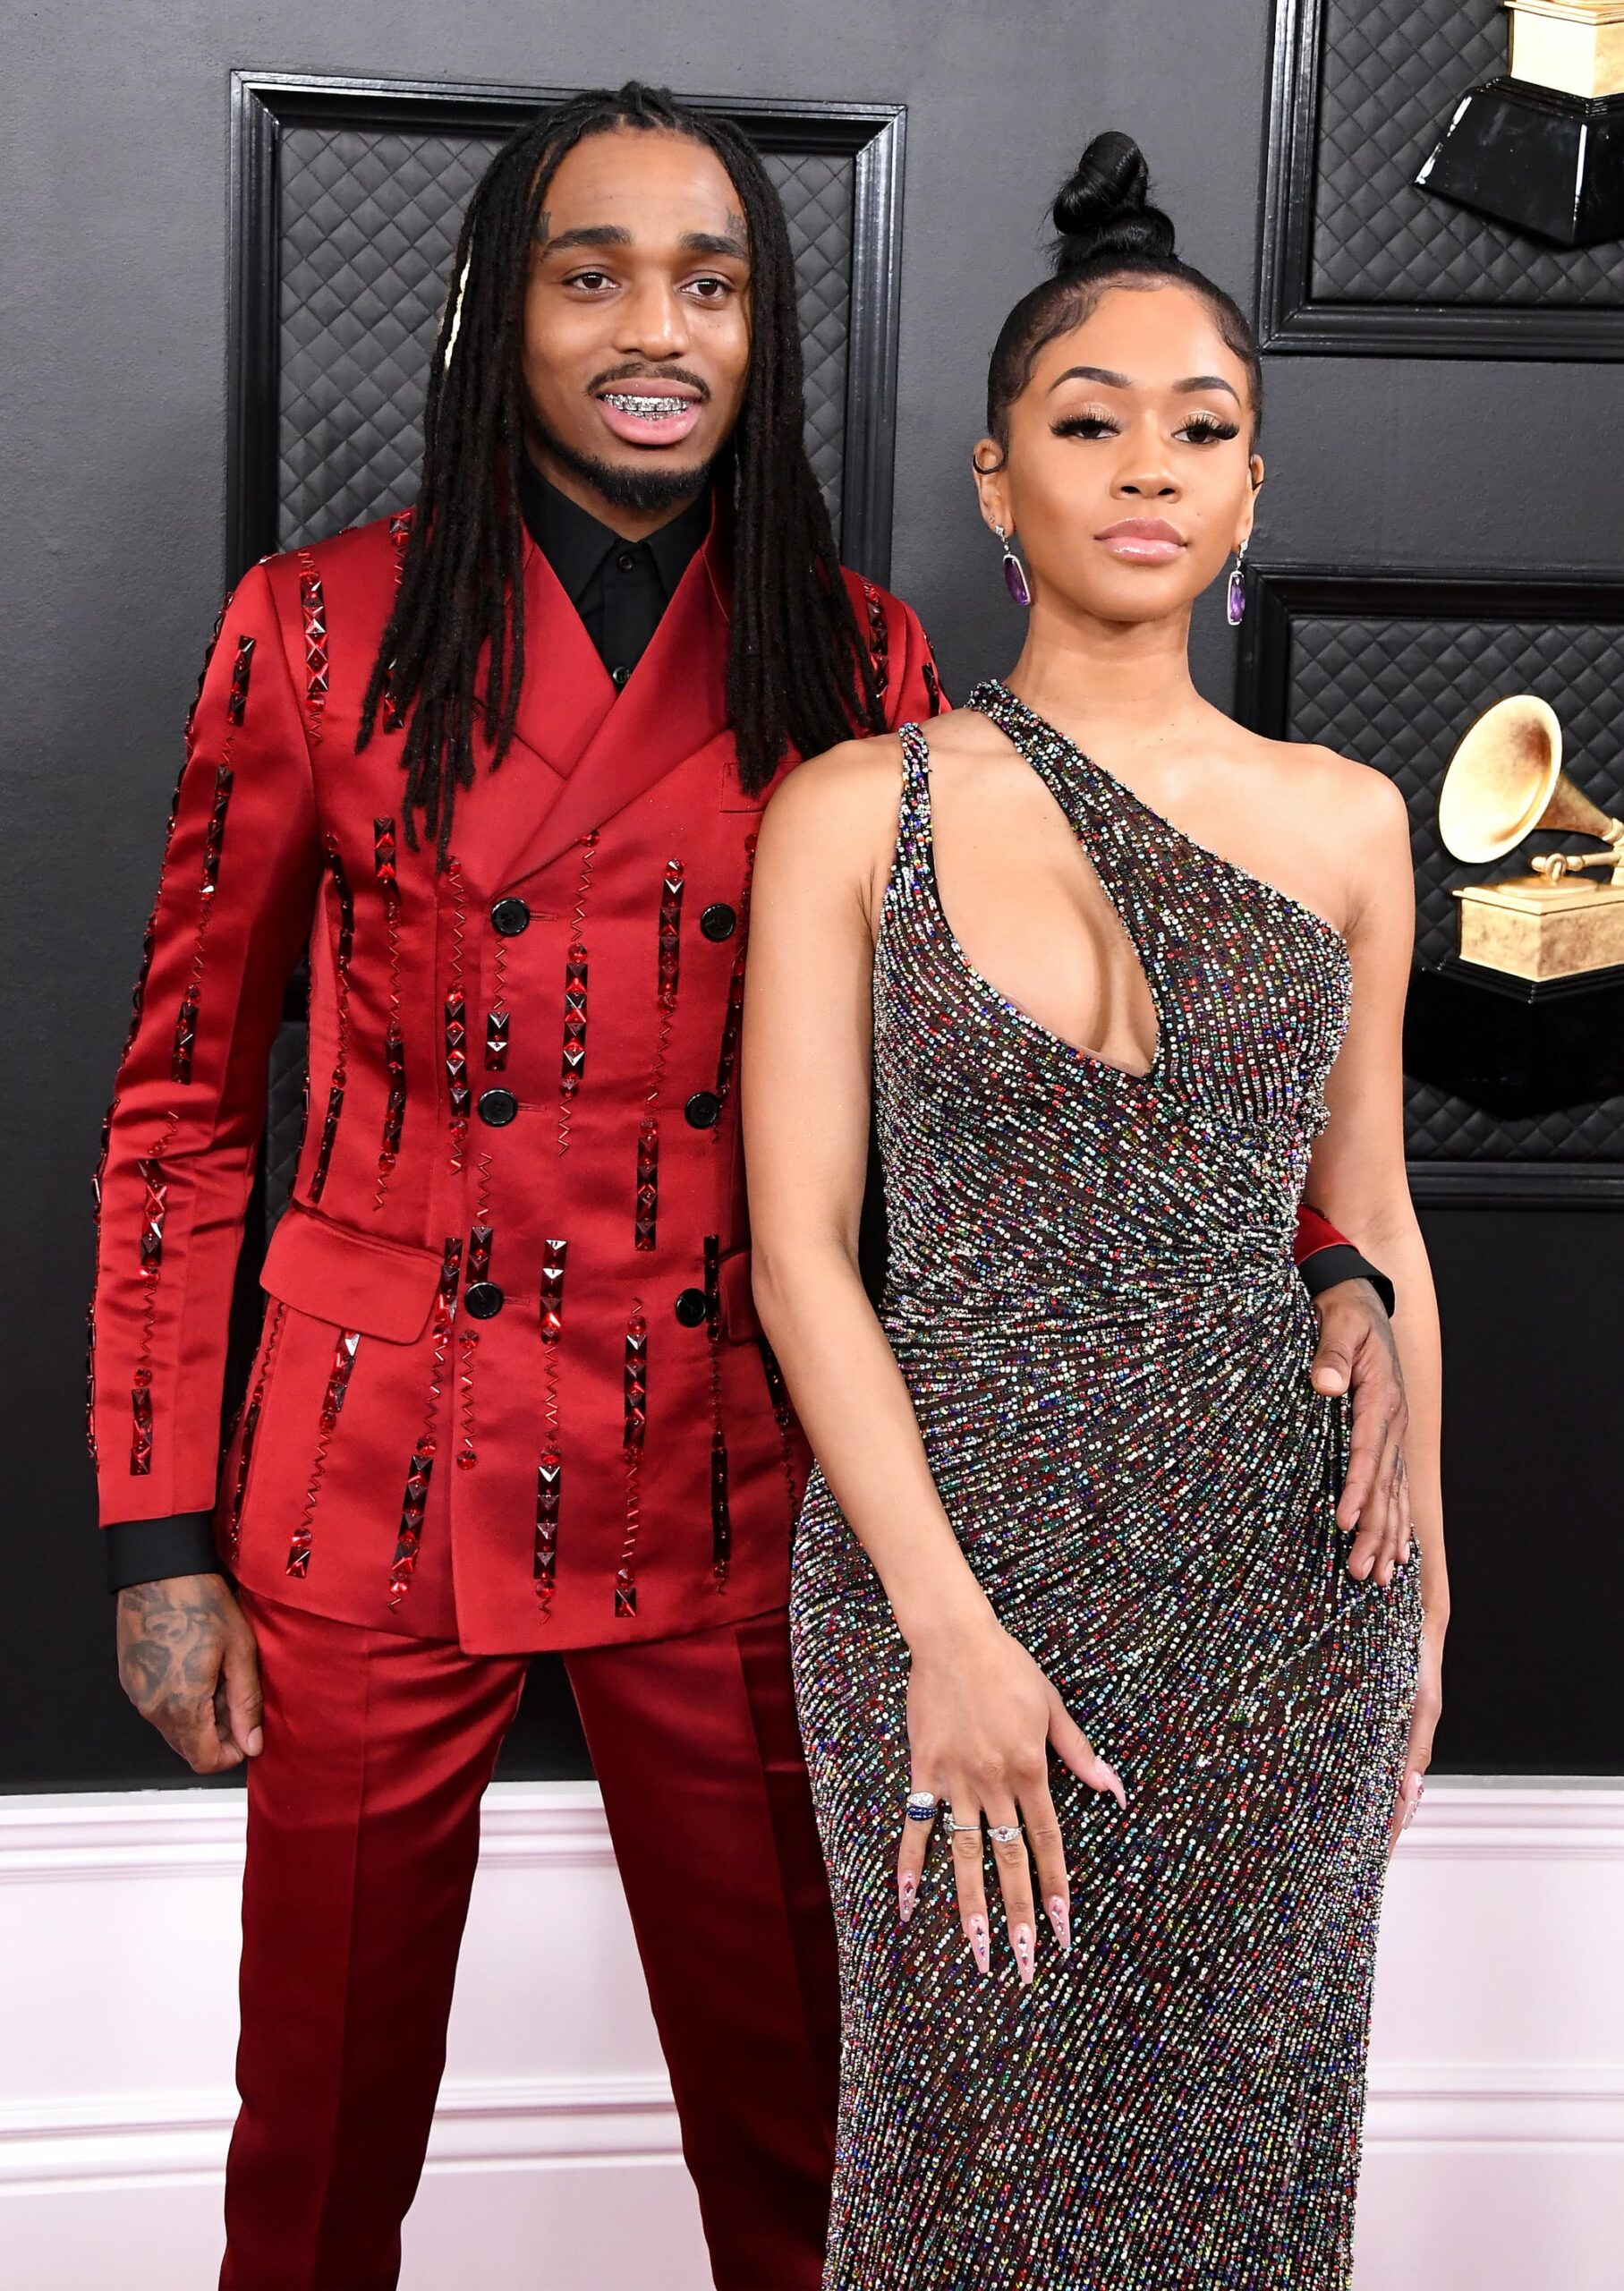 LOS ANGELES, CALIFORNIA - JANUARY 26: (L-R) Quavo and Saweetie attend the 62nd Annual GRAMMY Awards at Staples Center on January 26, 2020 in Los Angeles, California. (Photo by Steve Granitz/WireImage)